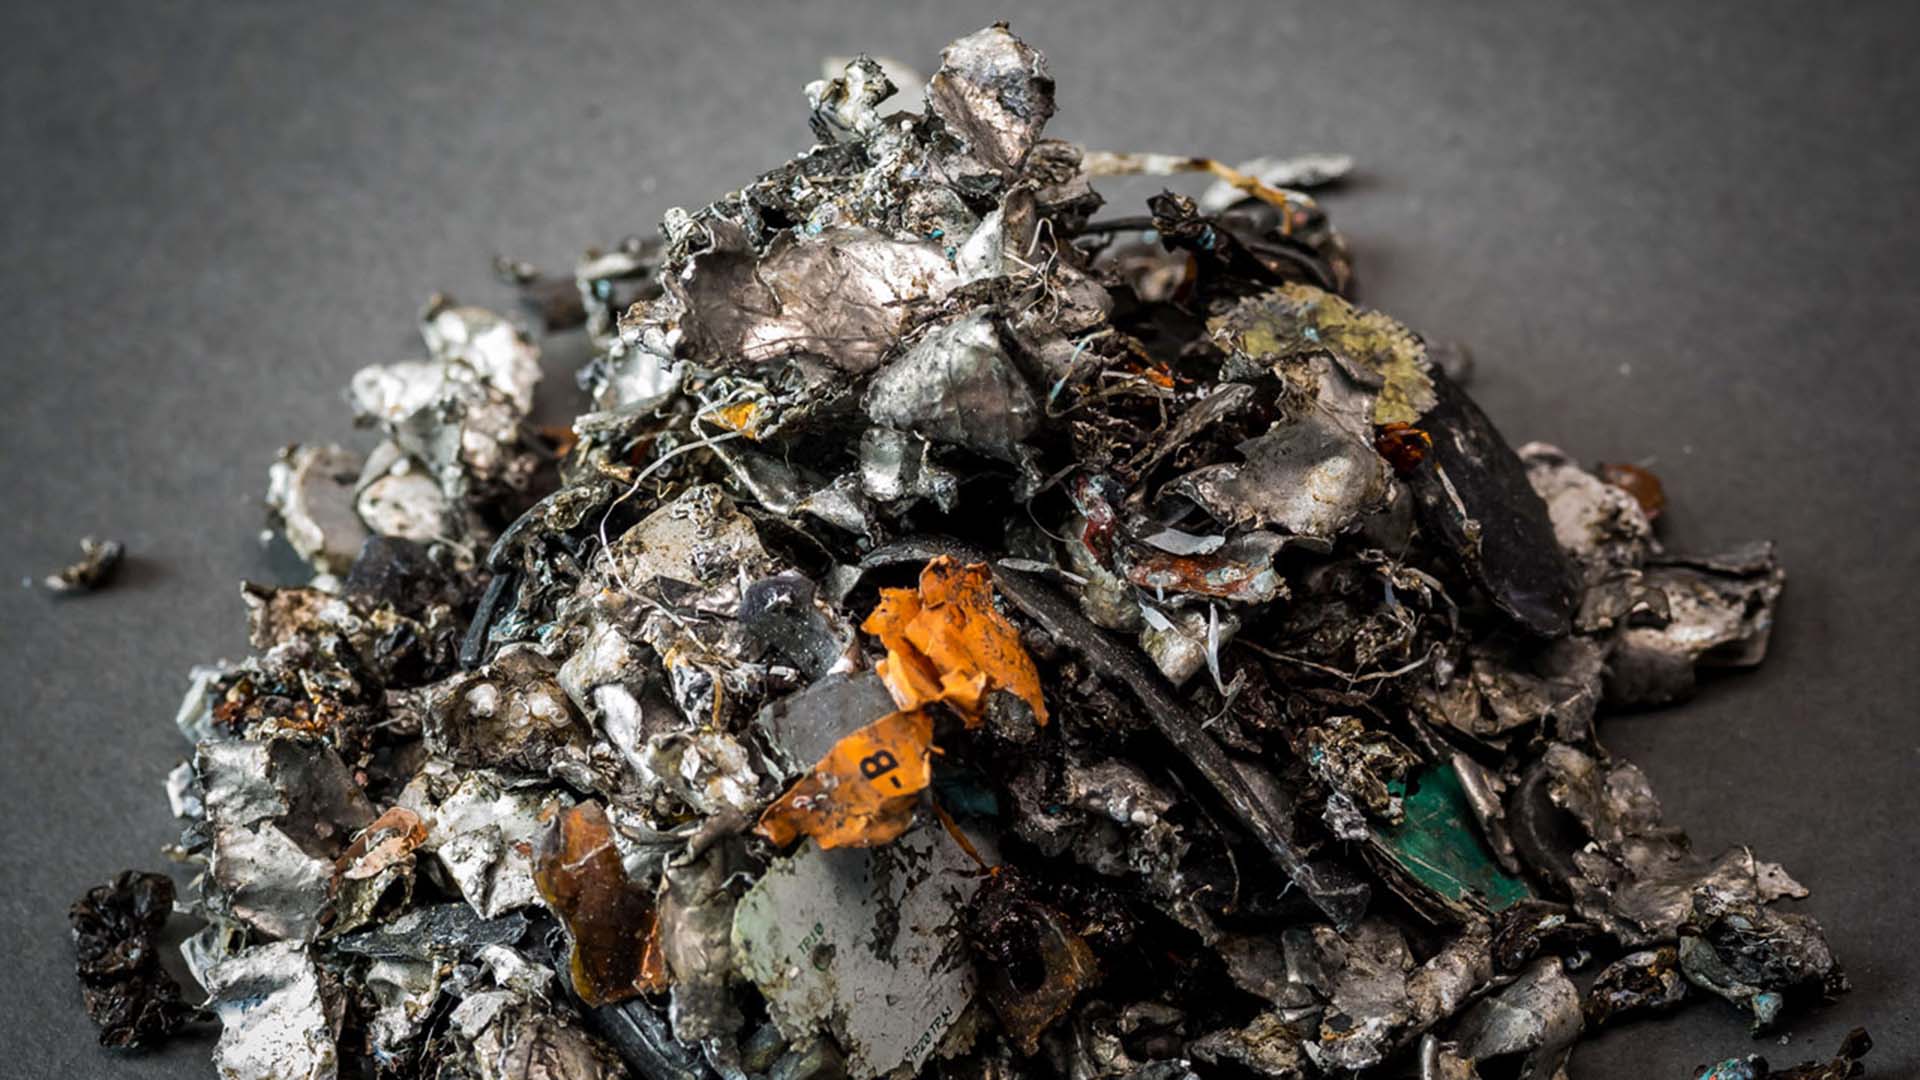 Battery recycling begins with disassembly and material separation, followed by shredding, which is called "Black Mass"